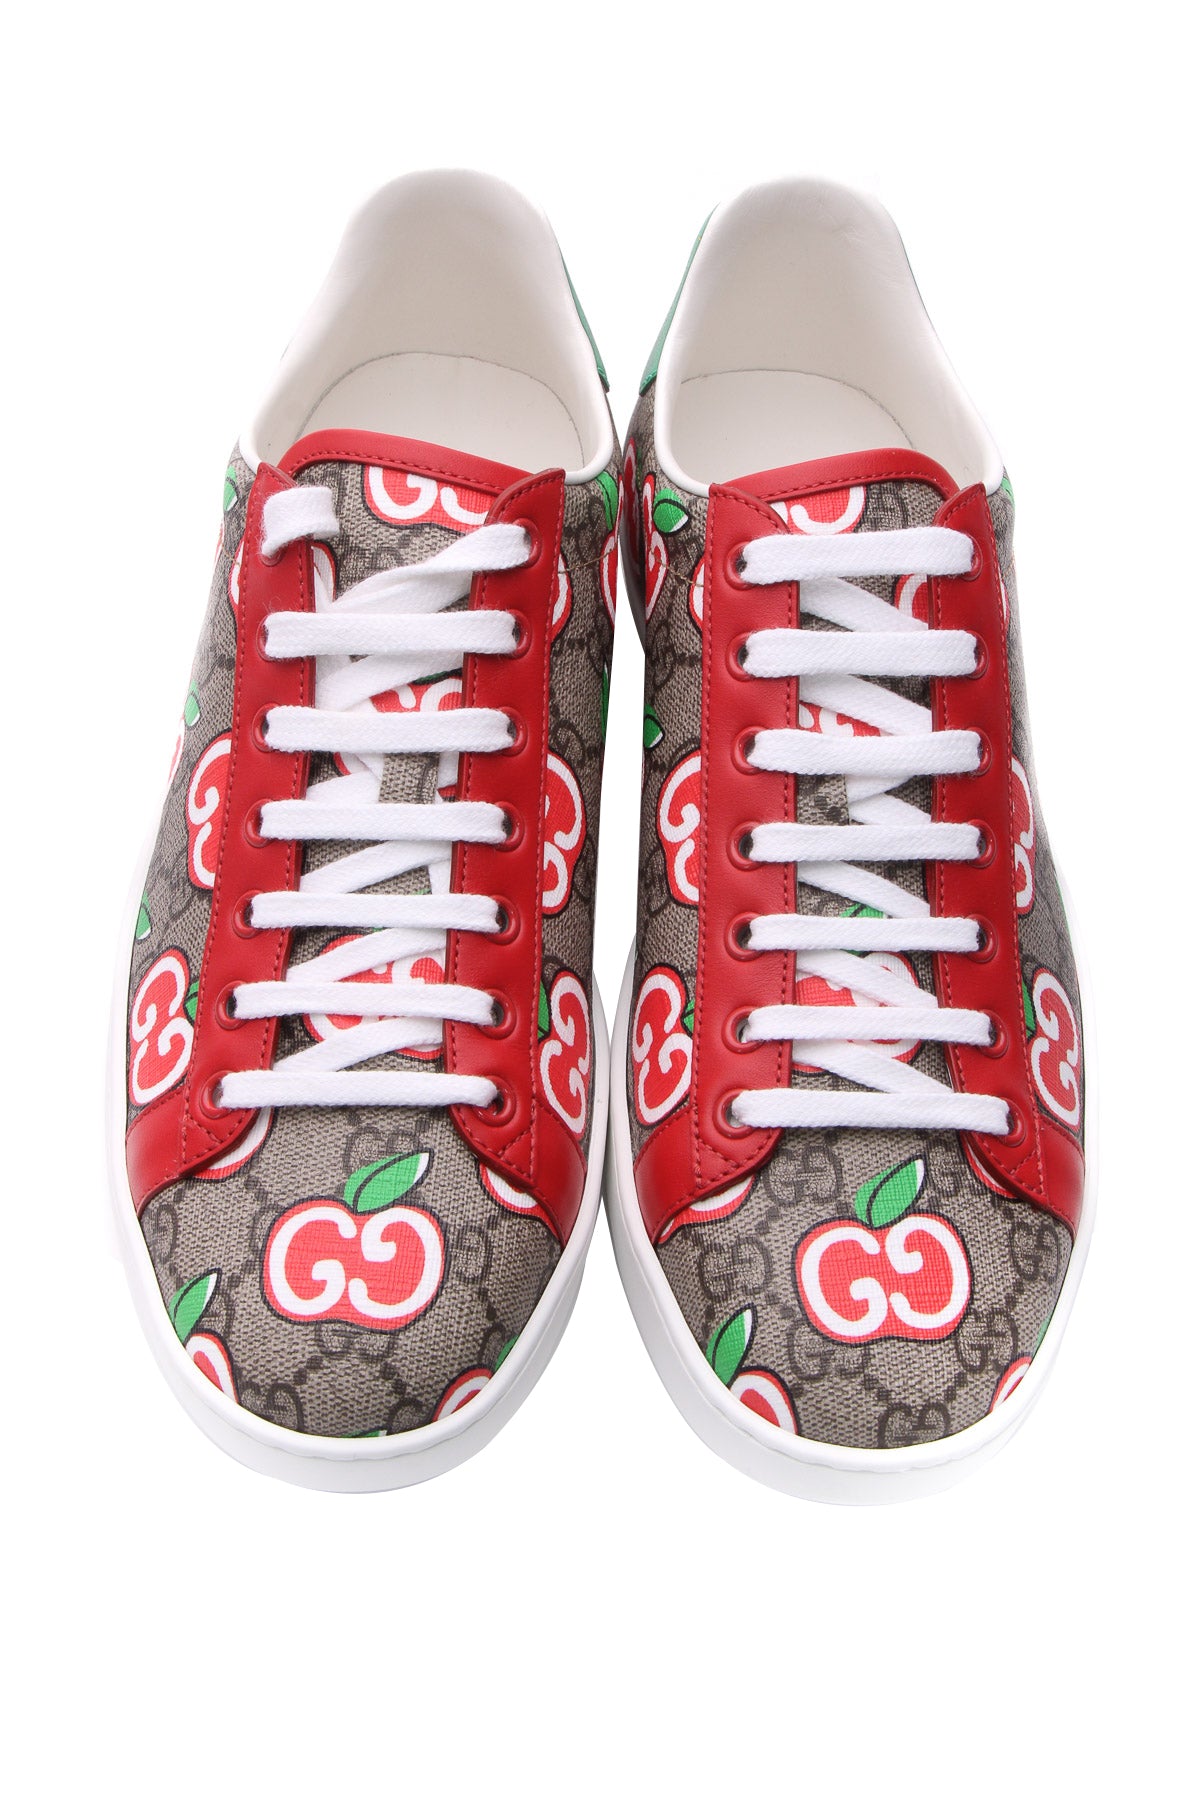 Gucci Apple Ace Sneakers - Size 40